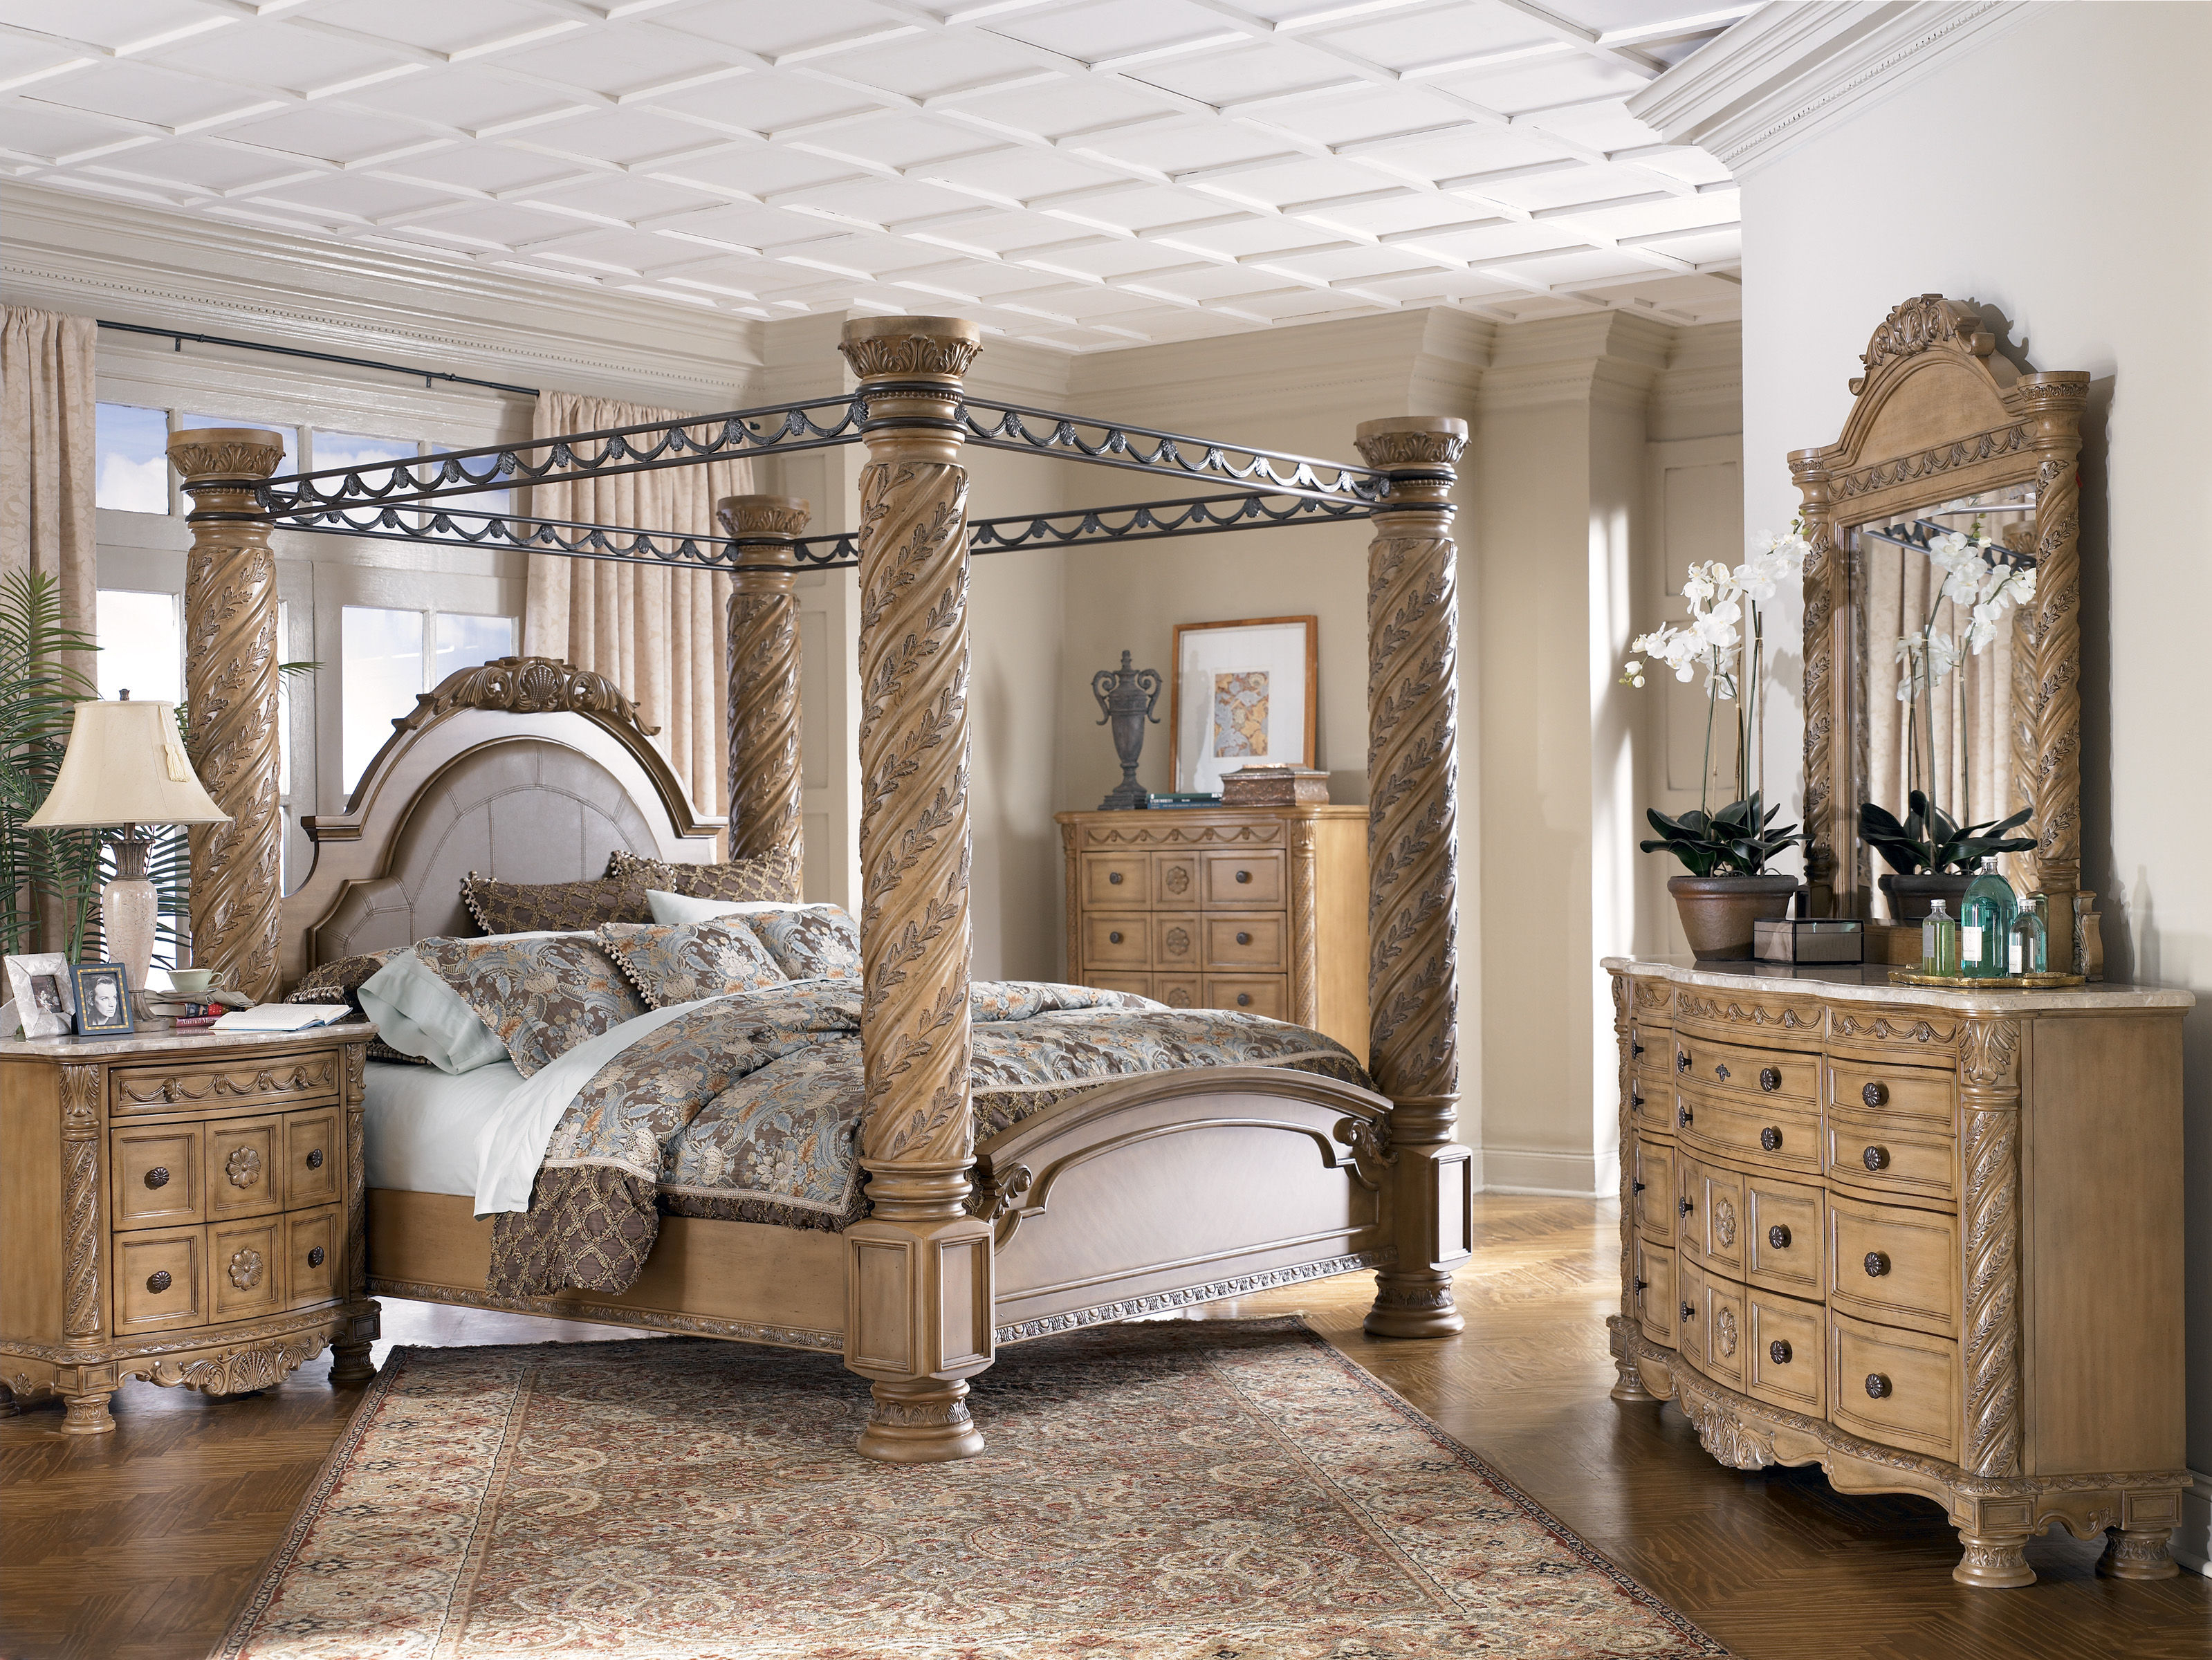 Old World 5 Pc Bedroom Set W King Poster Bed The Classy Home within sizing 3198 X 2400